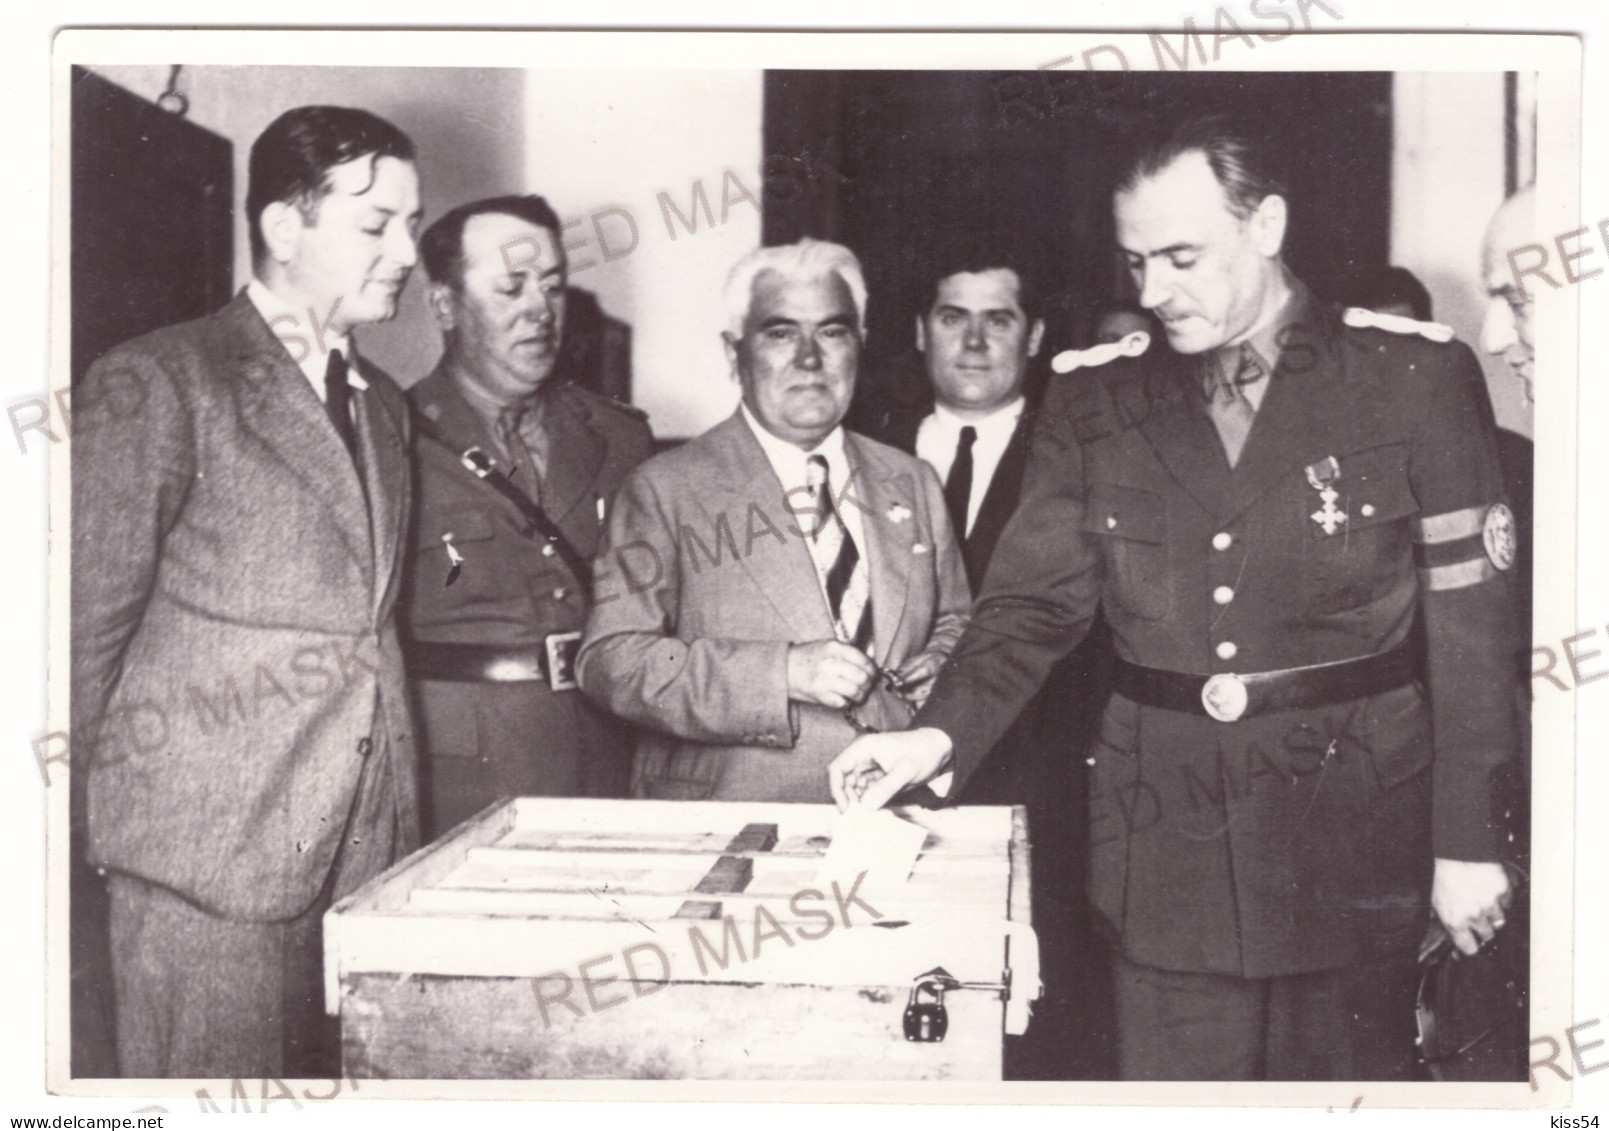 RO 89 - 19049 BUCHAREST, Grigore GAFENCU, Minister Of Foreign Affairs, Voting - Old Press Photo - 1939 - Roemenië